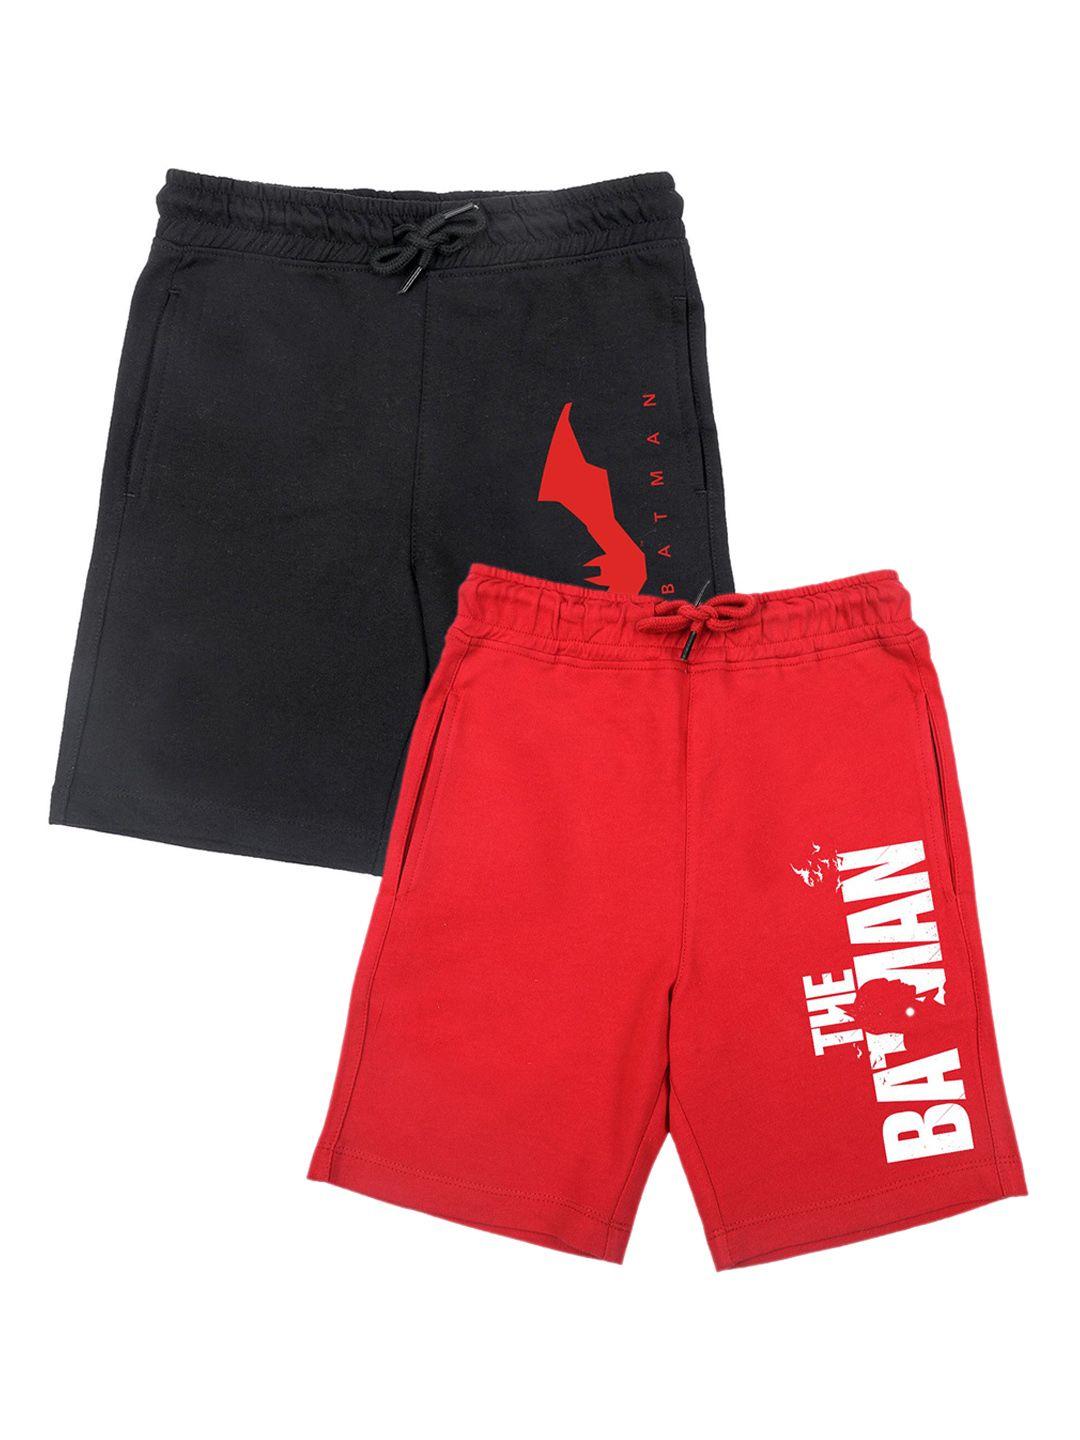 dc by wear your mind boys pack of 2 printed batman outdoor shorts